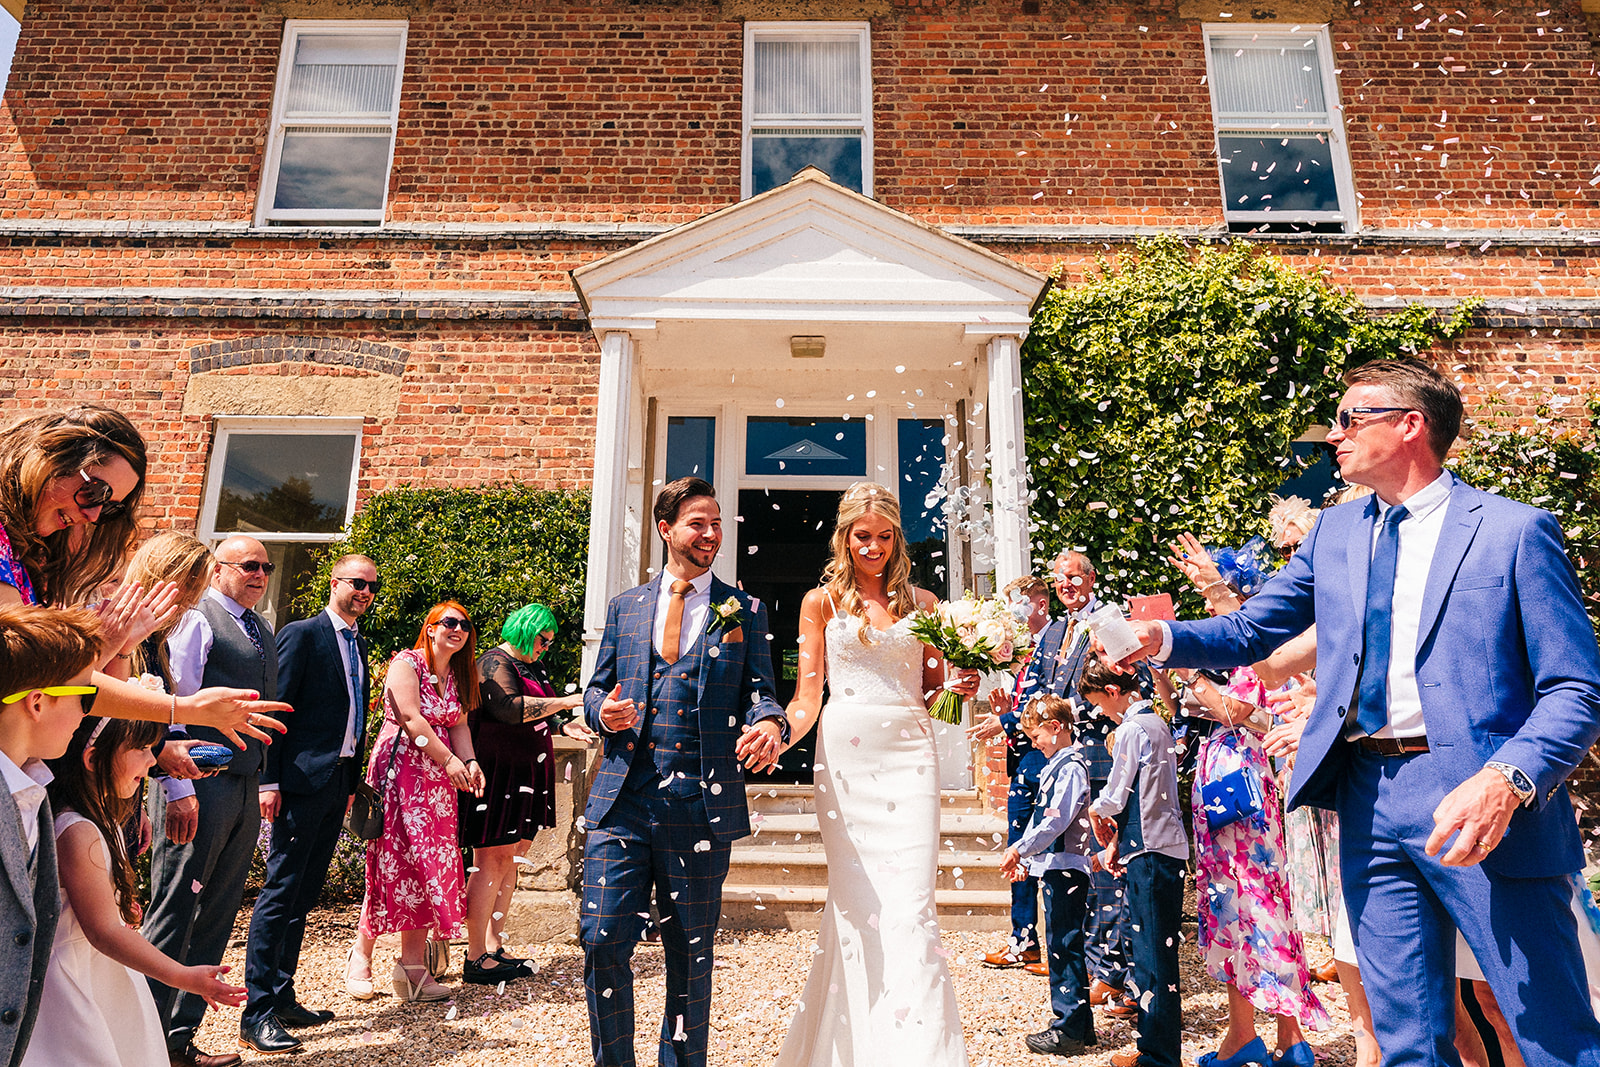 Shottle Hall Wedding Photography - the bride and groom get covered in confetti